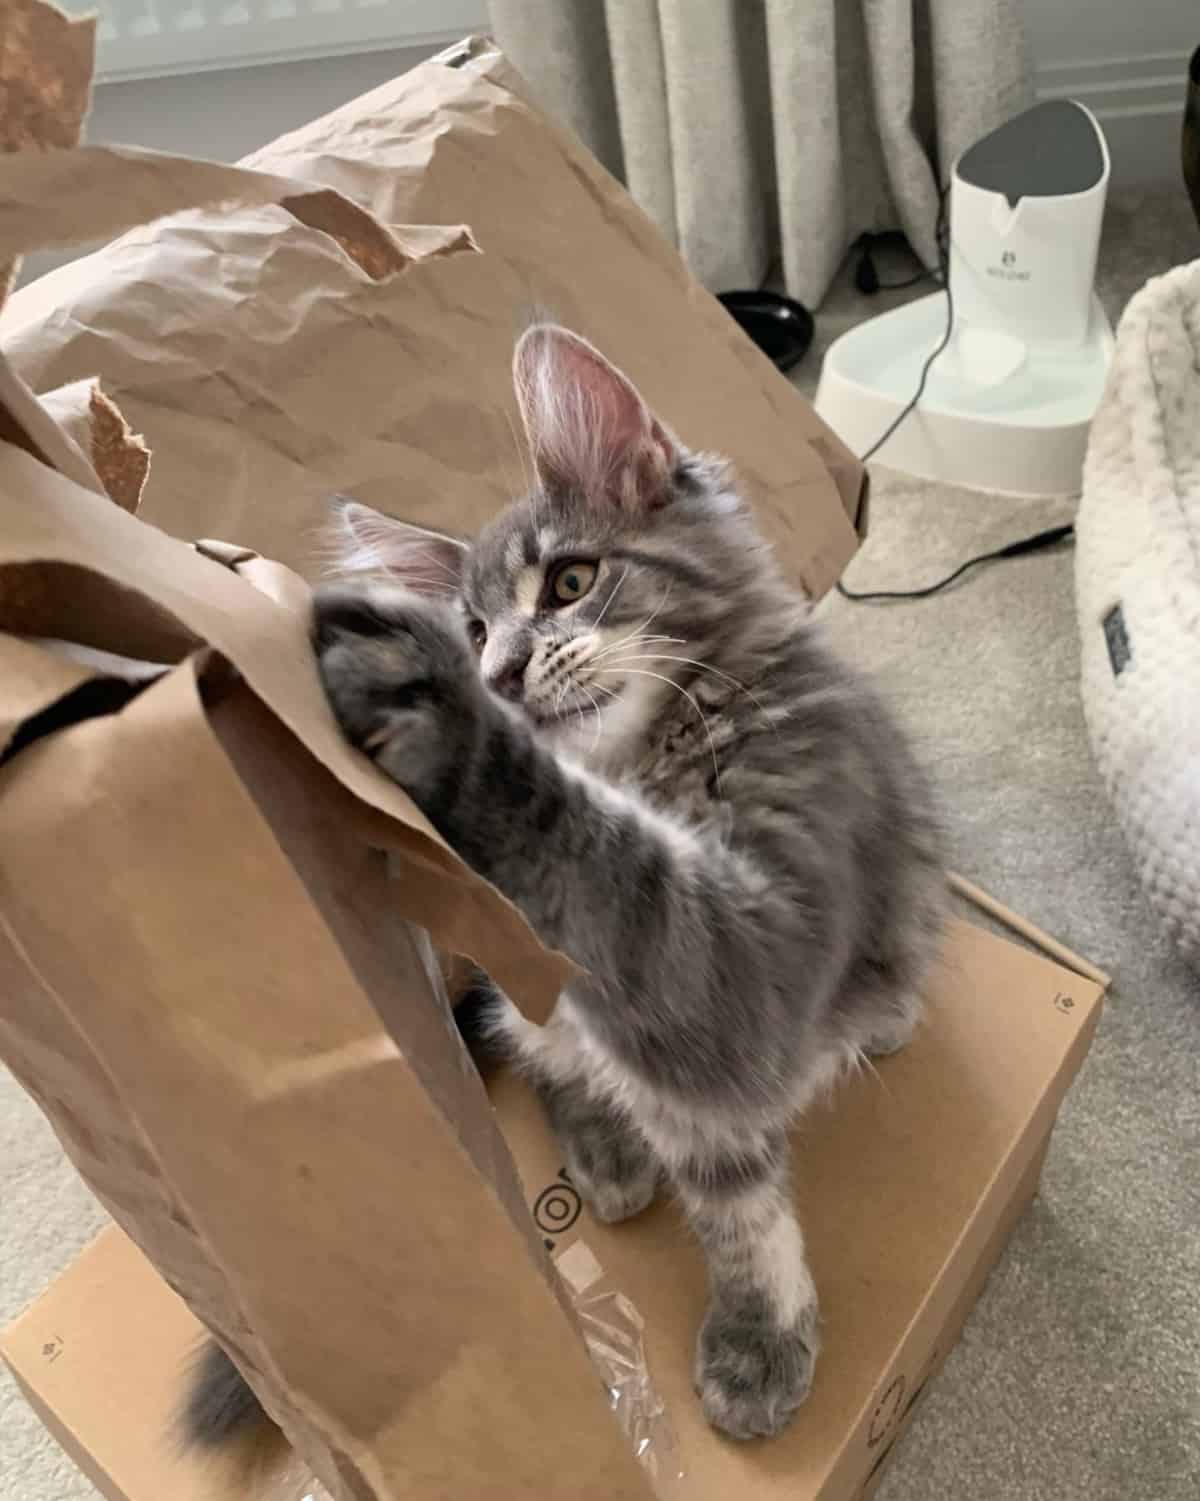 Kitten Playing With Cardboard